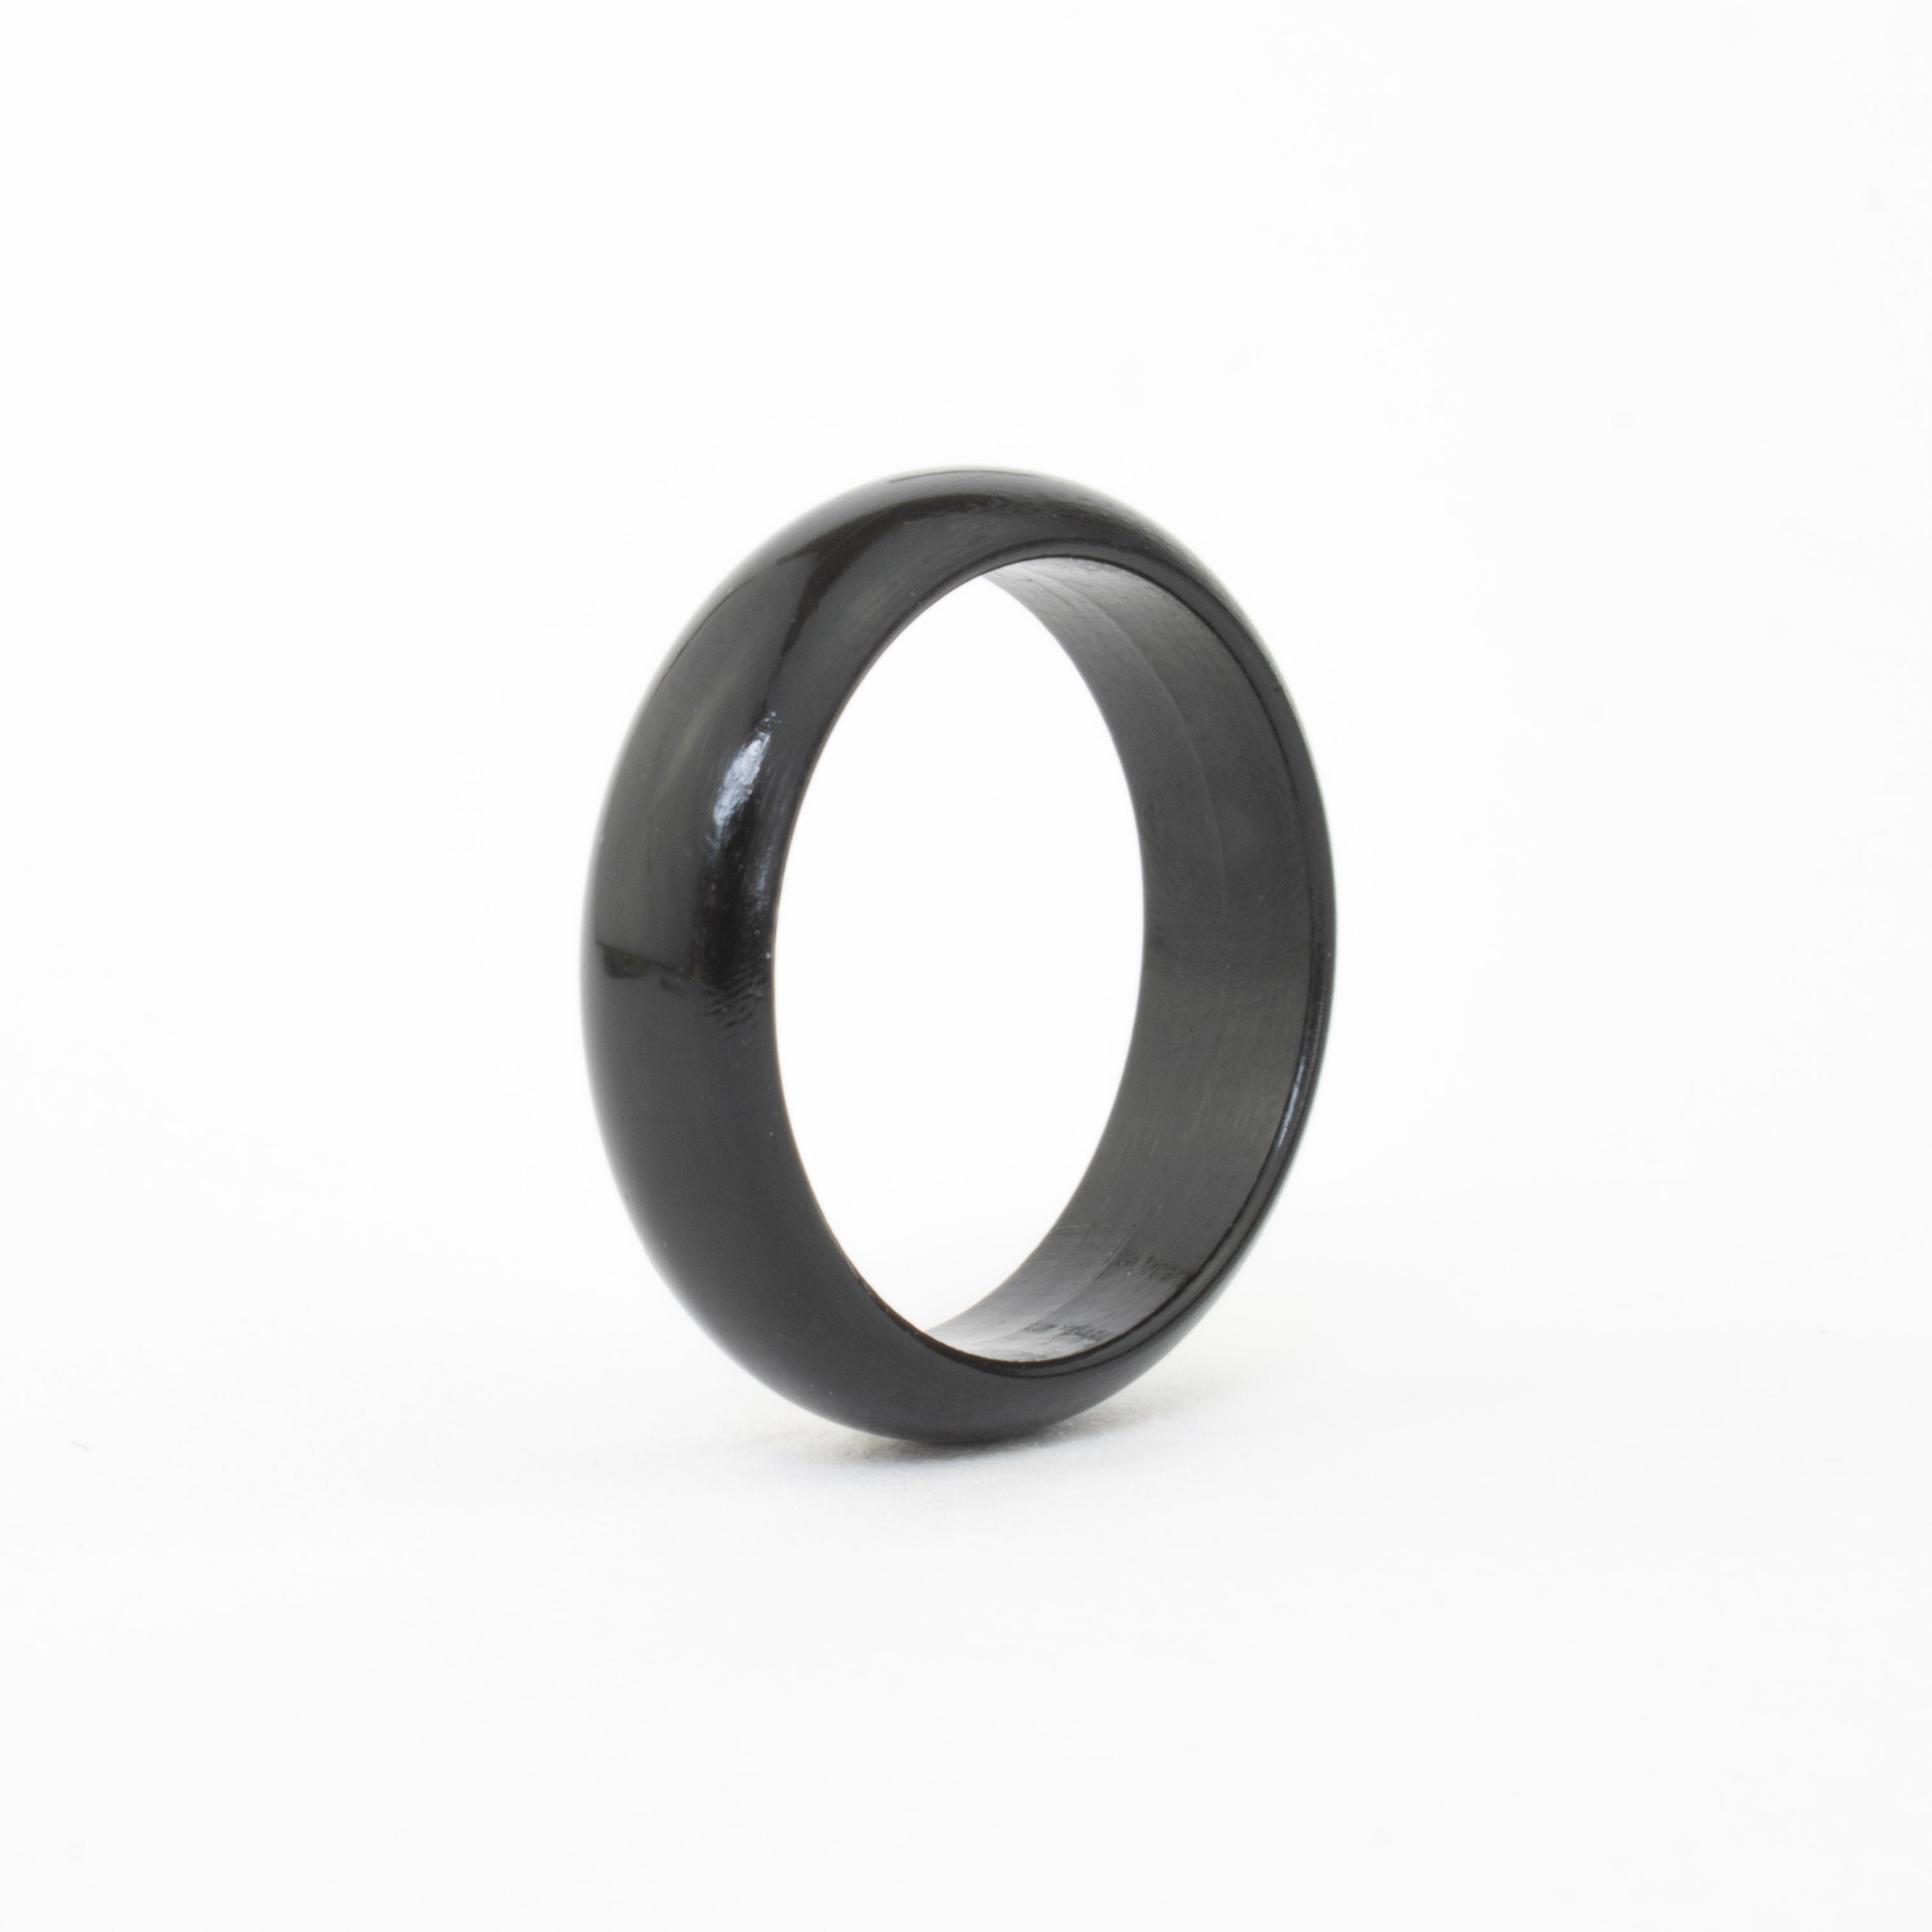 Rounded rings – Solus